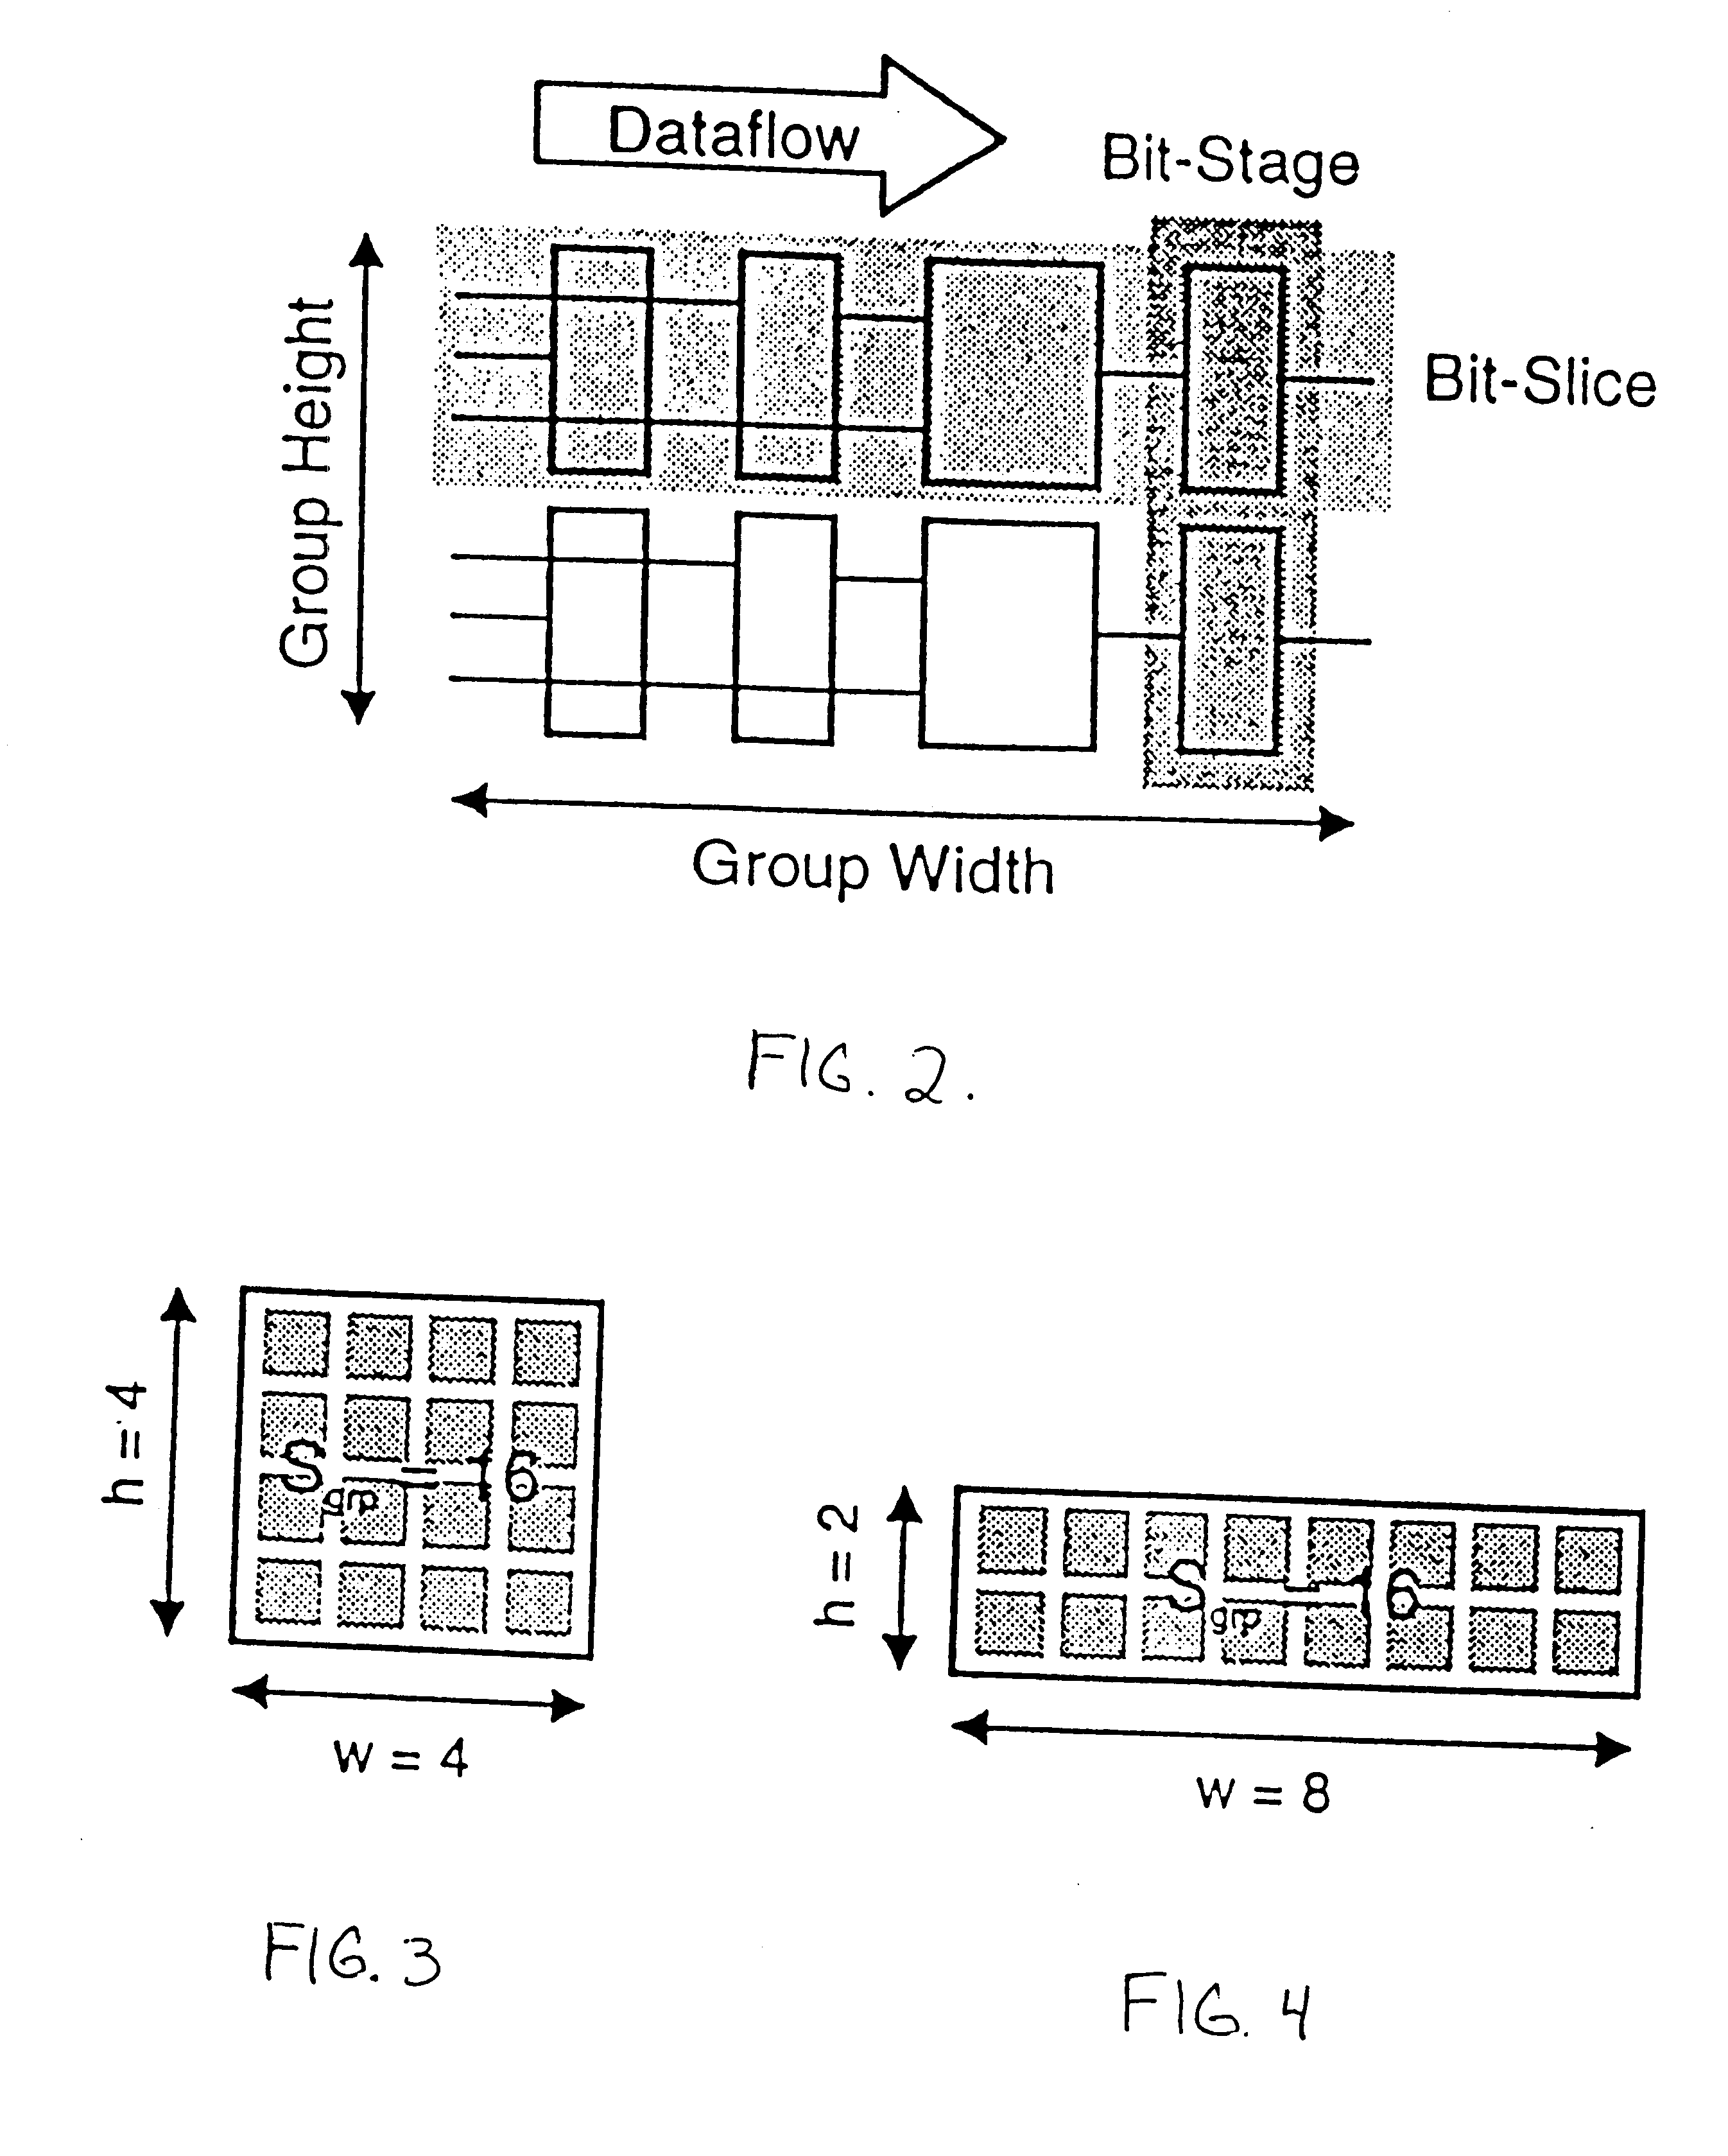 Method for preserving regularity during logic synthesis